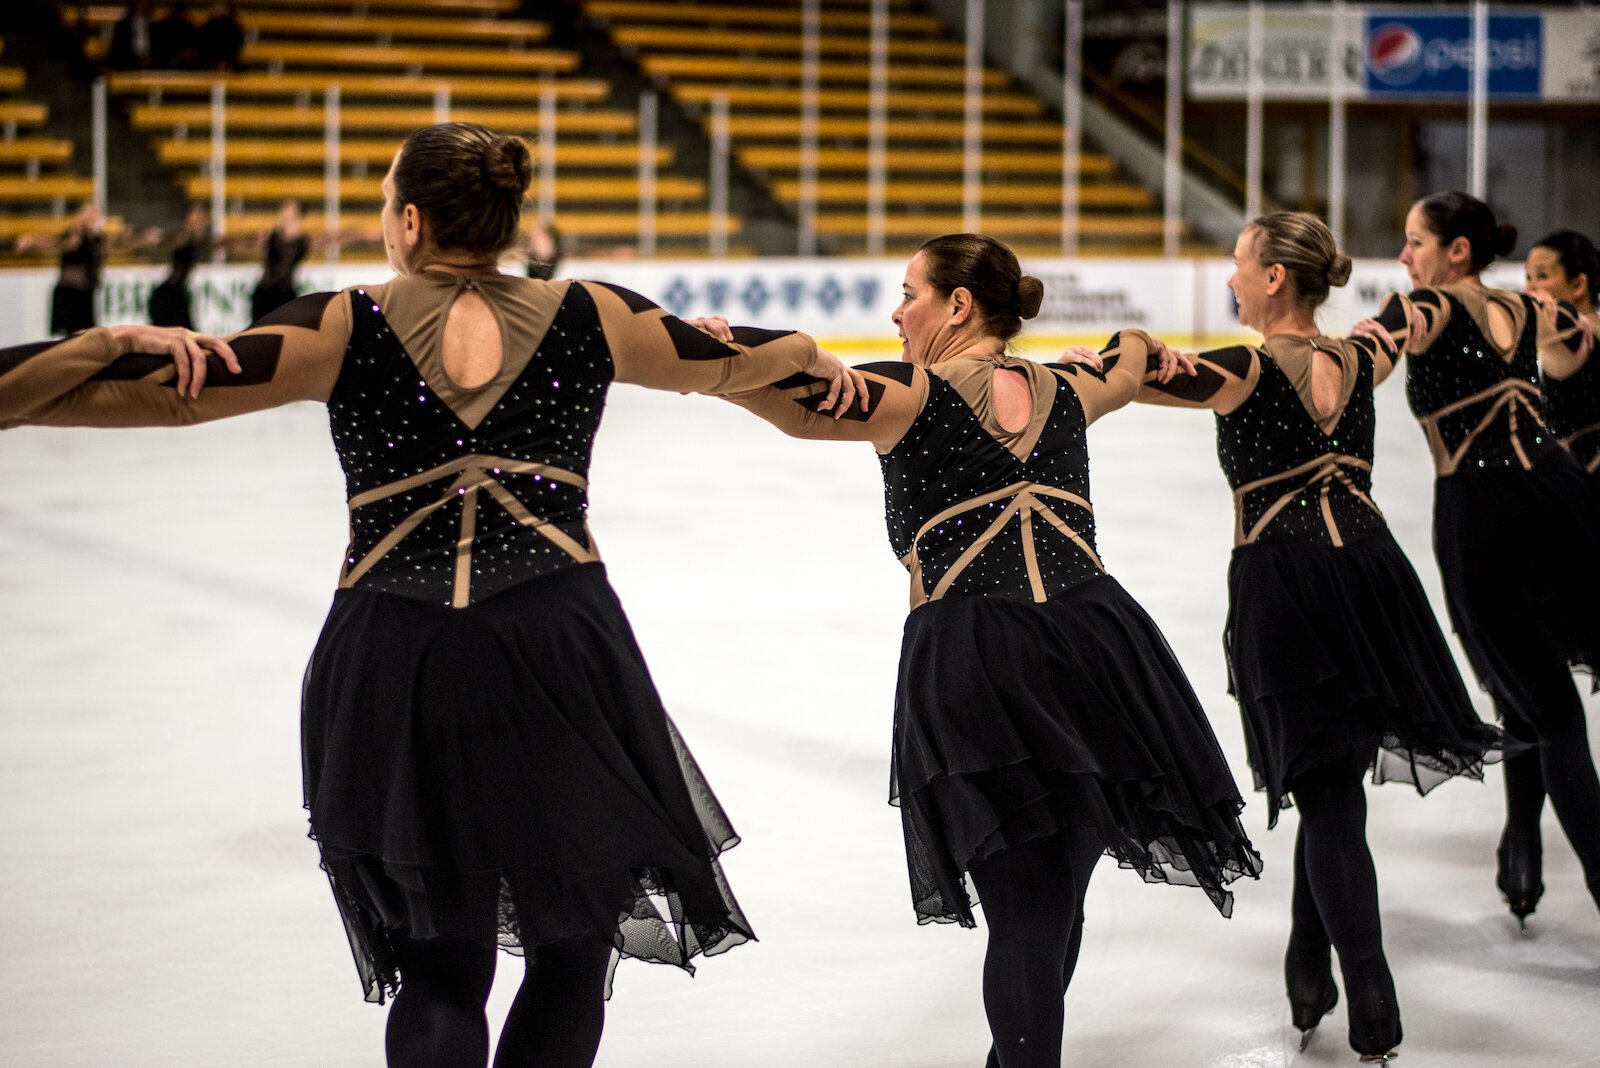 The Kalamazoo Kinetics synchro-skaters range in age from 25 to 54.